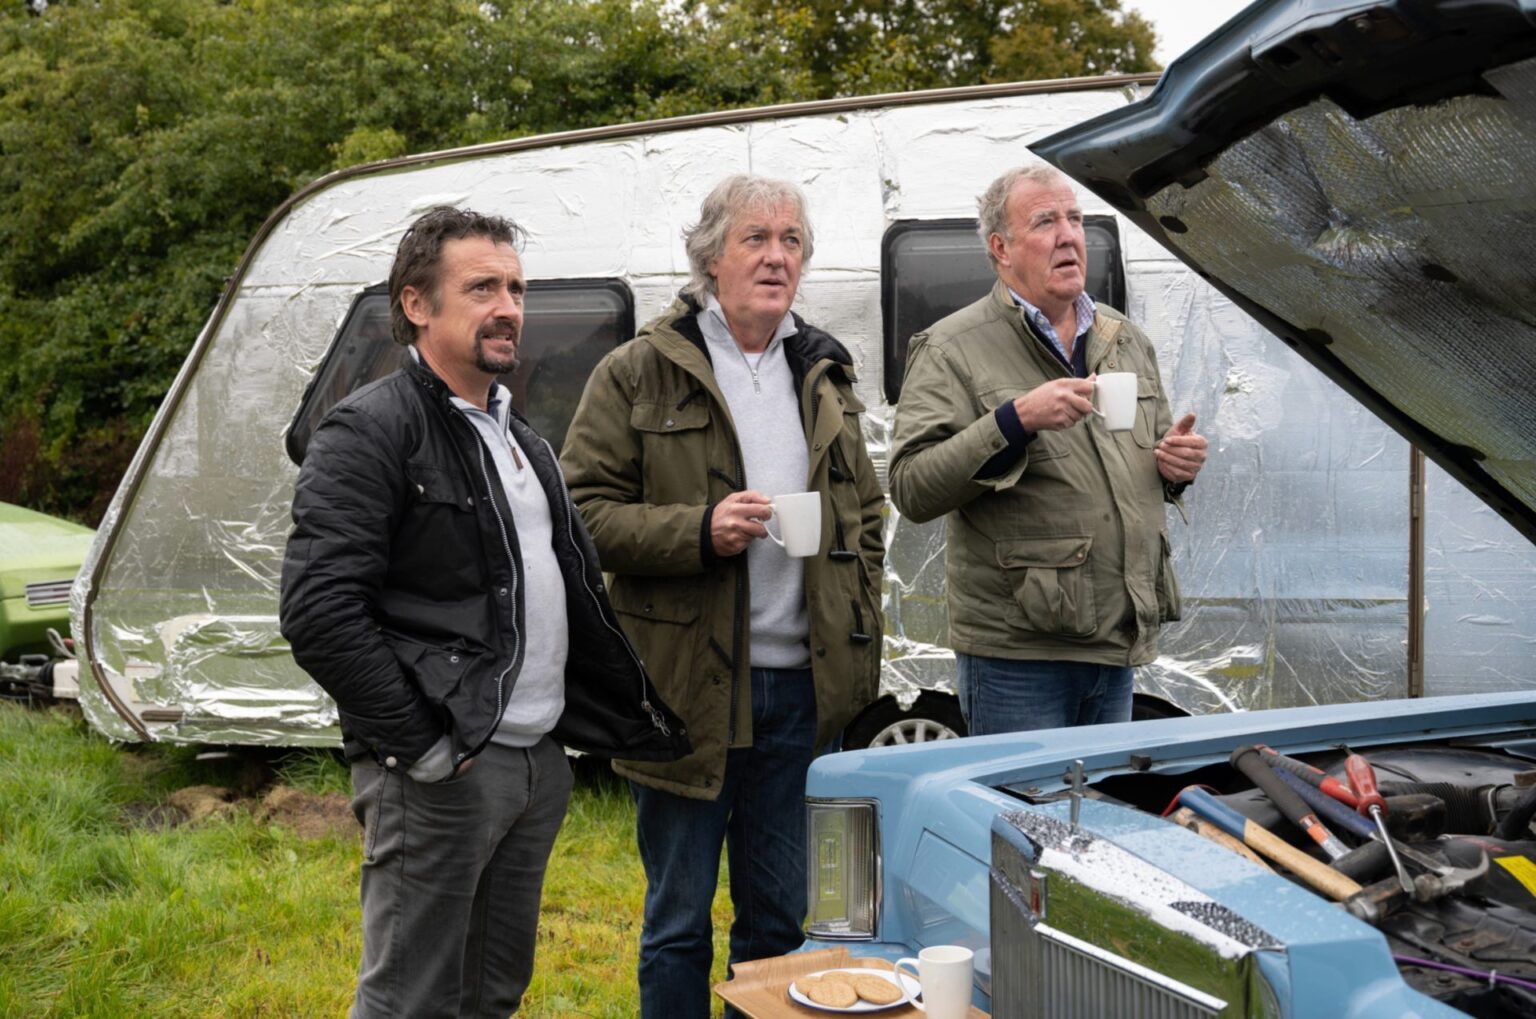 Next Episode of The Grand Tour Could be Round the Corner Grand Tour